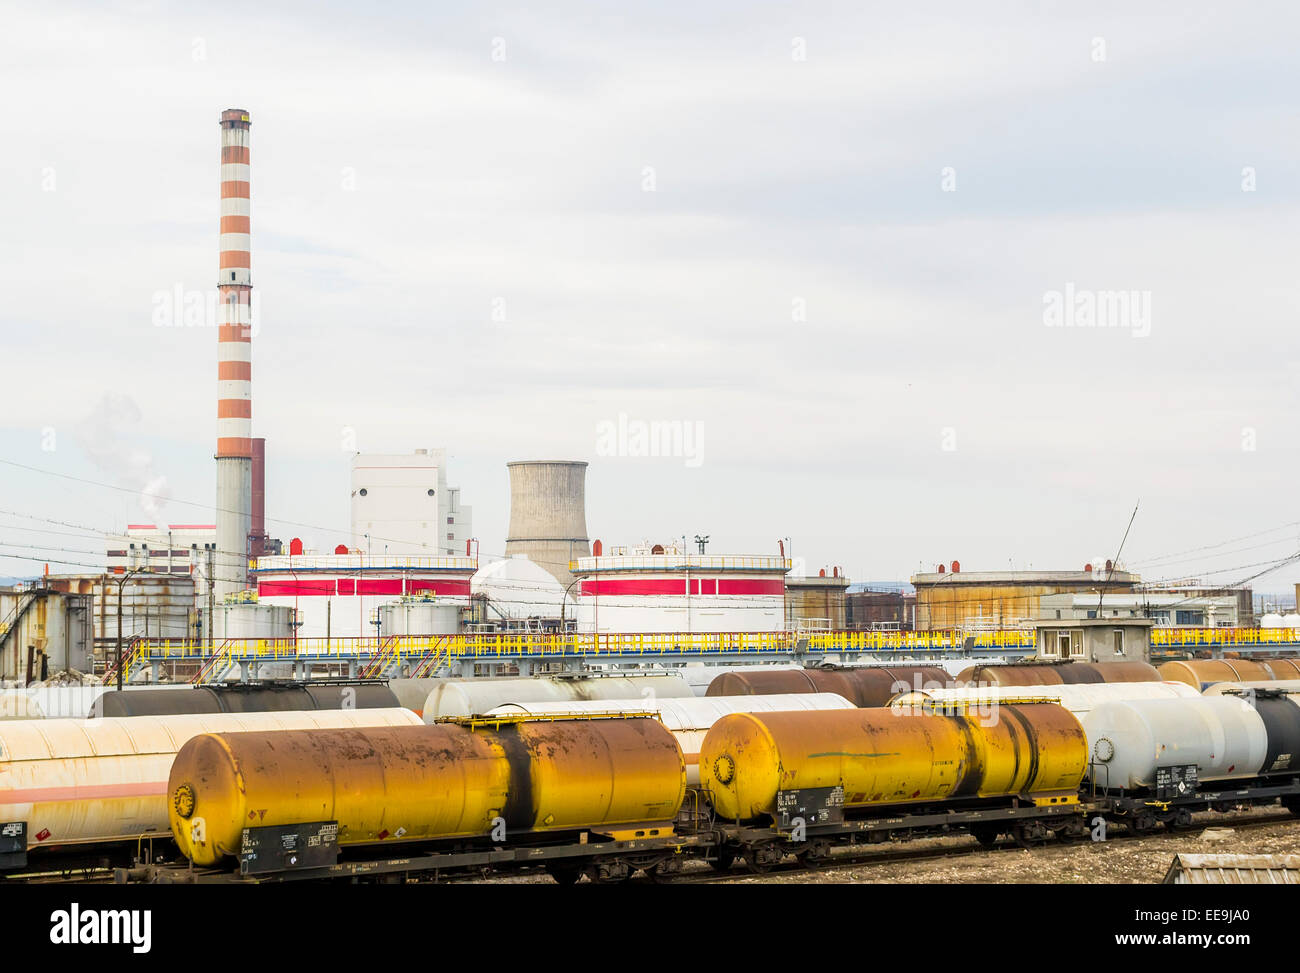 Oil tankers loaded with fuel at an oil and gas refinery Stock Photo